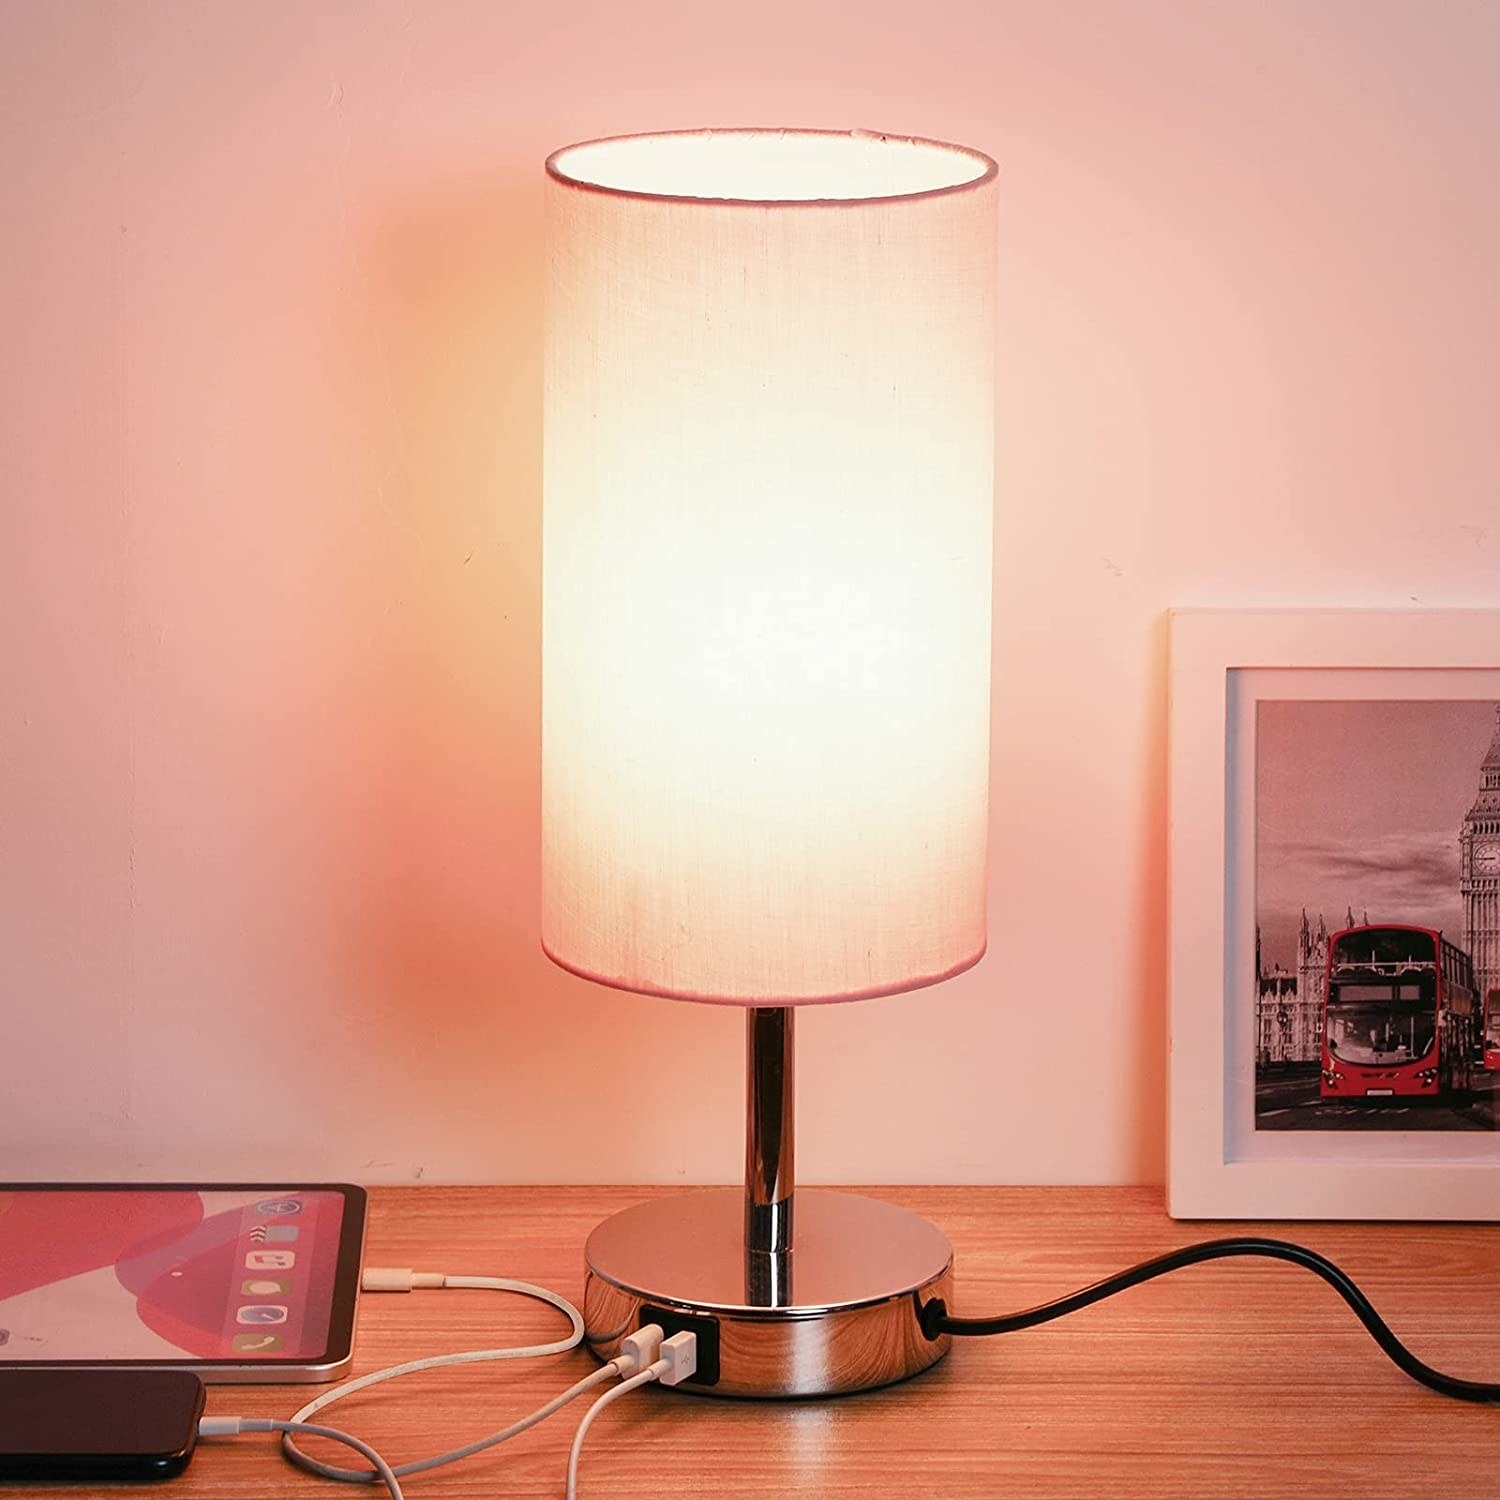 a simple nightstand light charing up two devices via the usb ports in the base